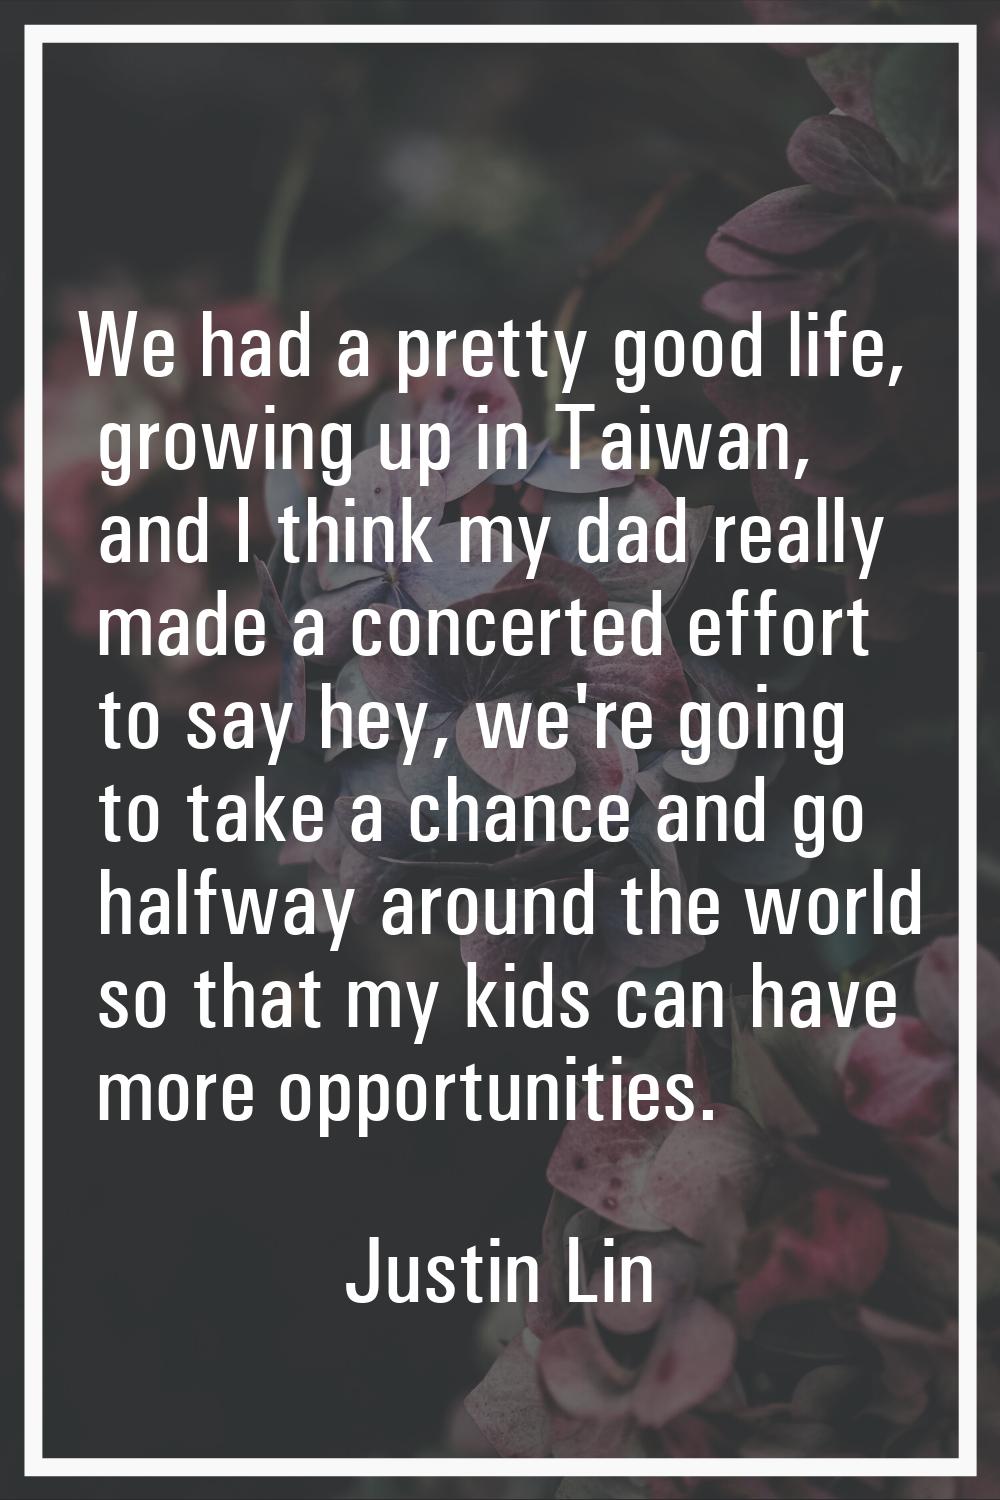 We had a pretty good life, growing up in Taiwan, and I think my dad really made a concerted effort 